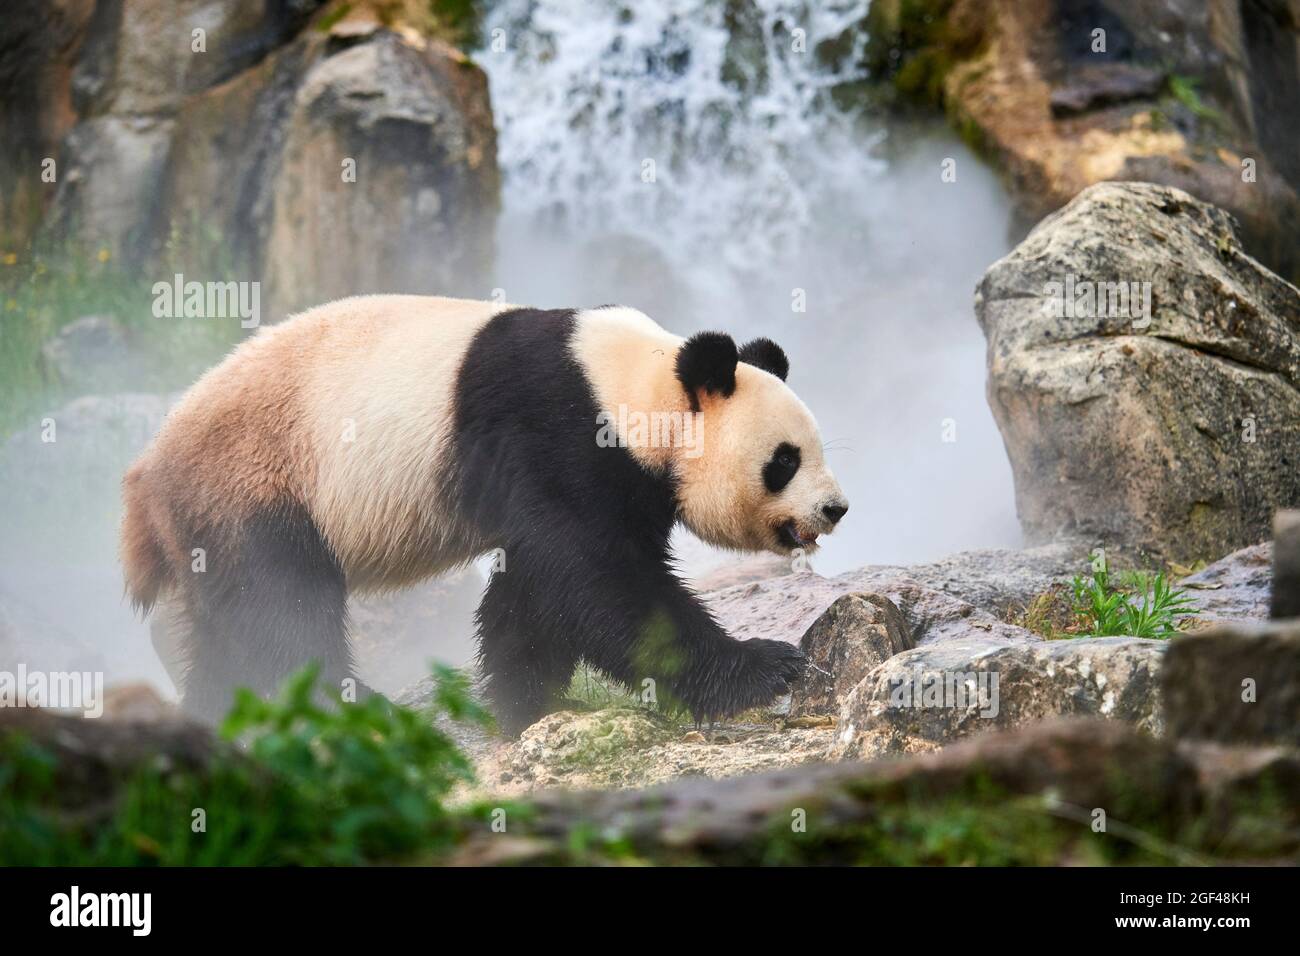 Giant panda (Ailuropoda melanoleuca) male out in her enclosure in mist, Captive at Beauval Zoo, Saint Aignan sur Cher, France. The mist is created Stock Photo